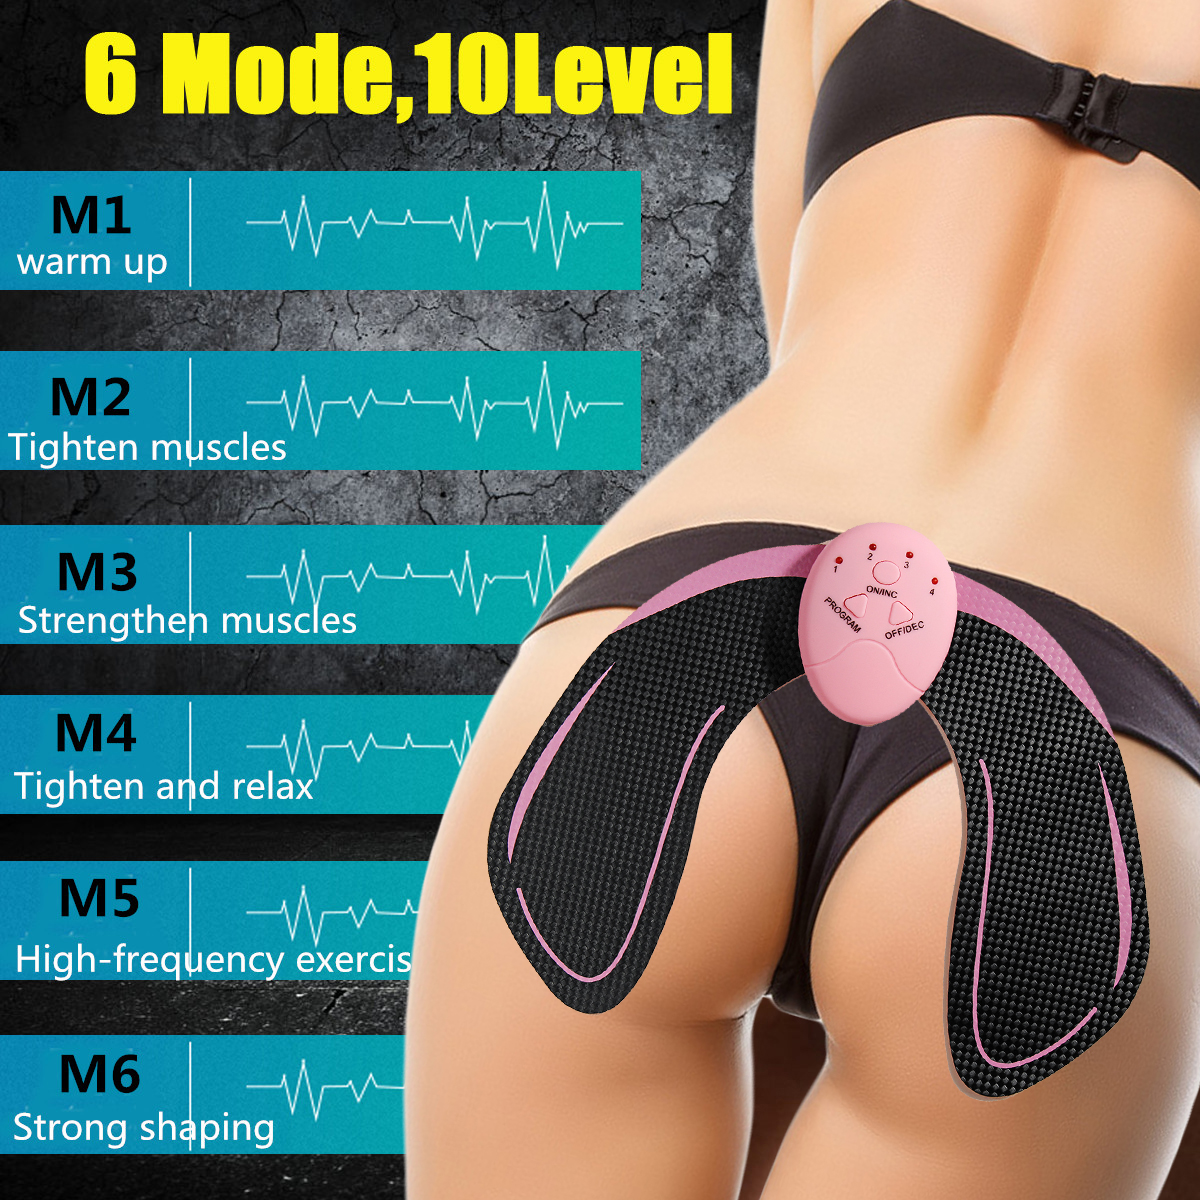 EMS-Hip-Trainer-PUABS-Buttocks-Fitness-Muscle-Stimulation-Body-Building-Shaper-Massager-1372254